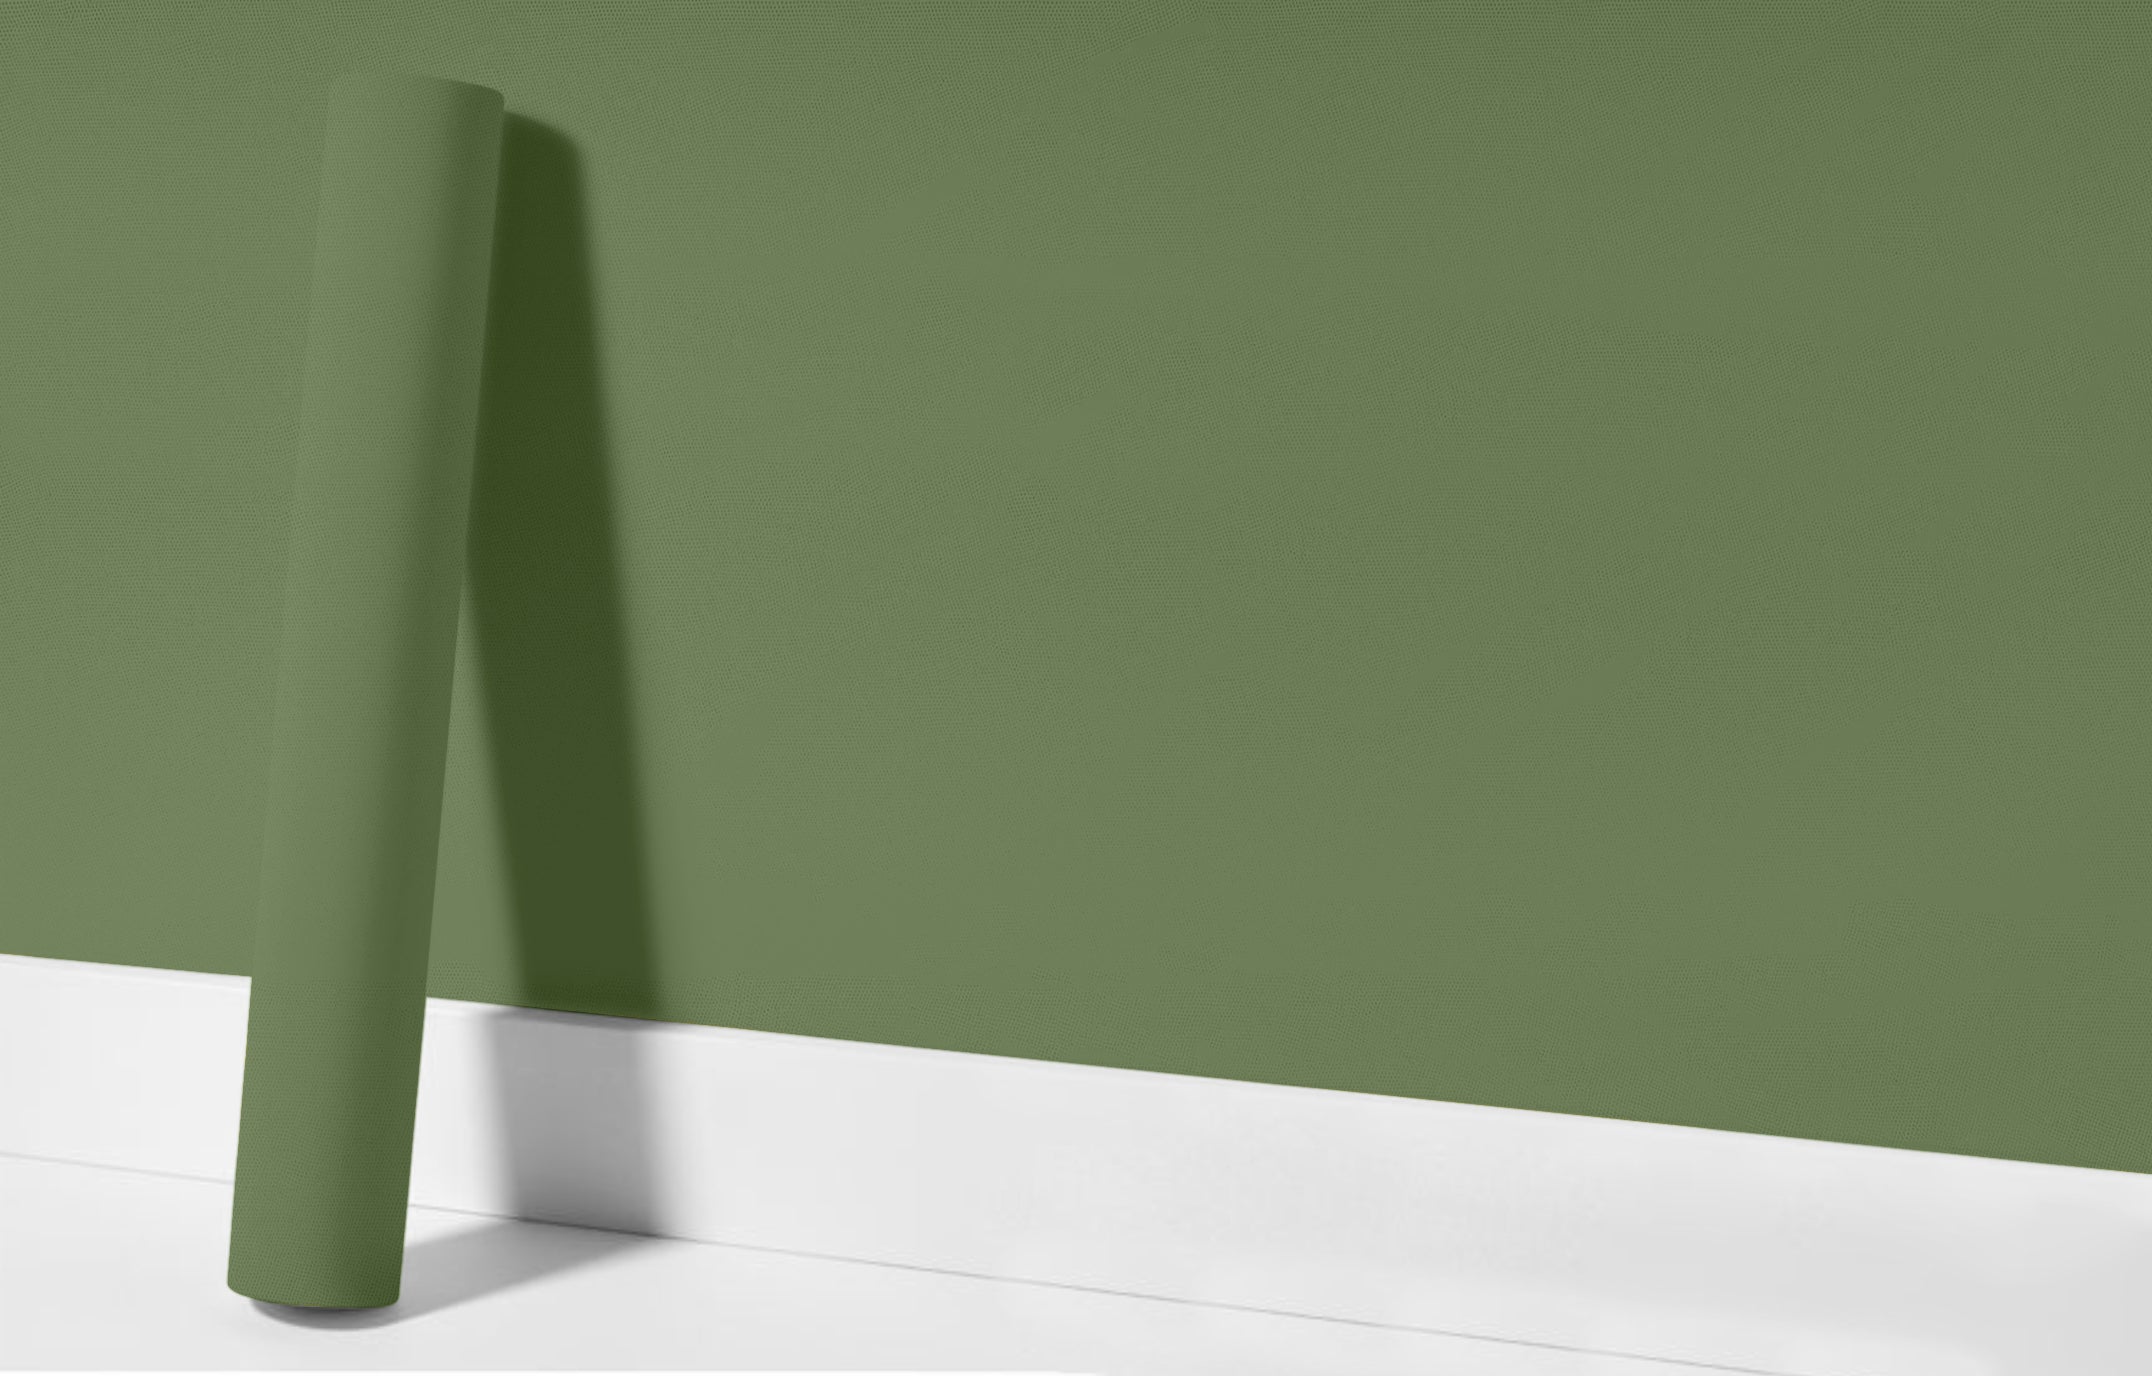 Peel & Stick Removable Re-usable Paint - Color RAL 6011 Reseda Green - offRAL™ - RALRAW LLC, USA